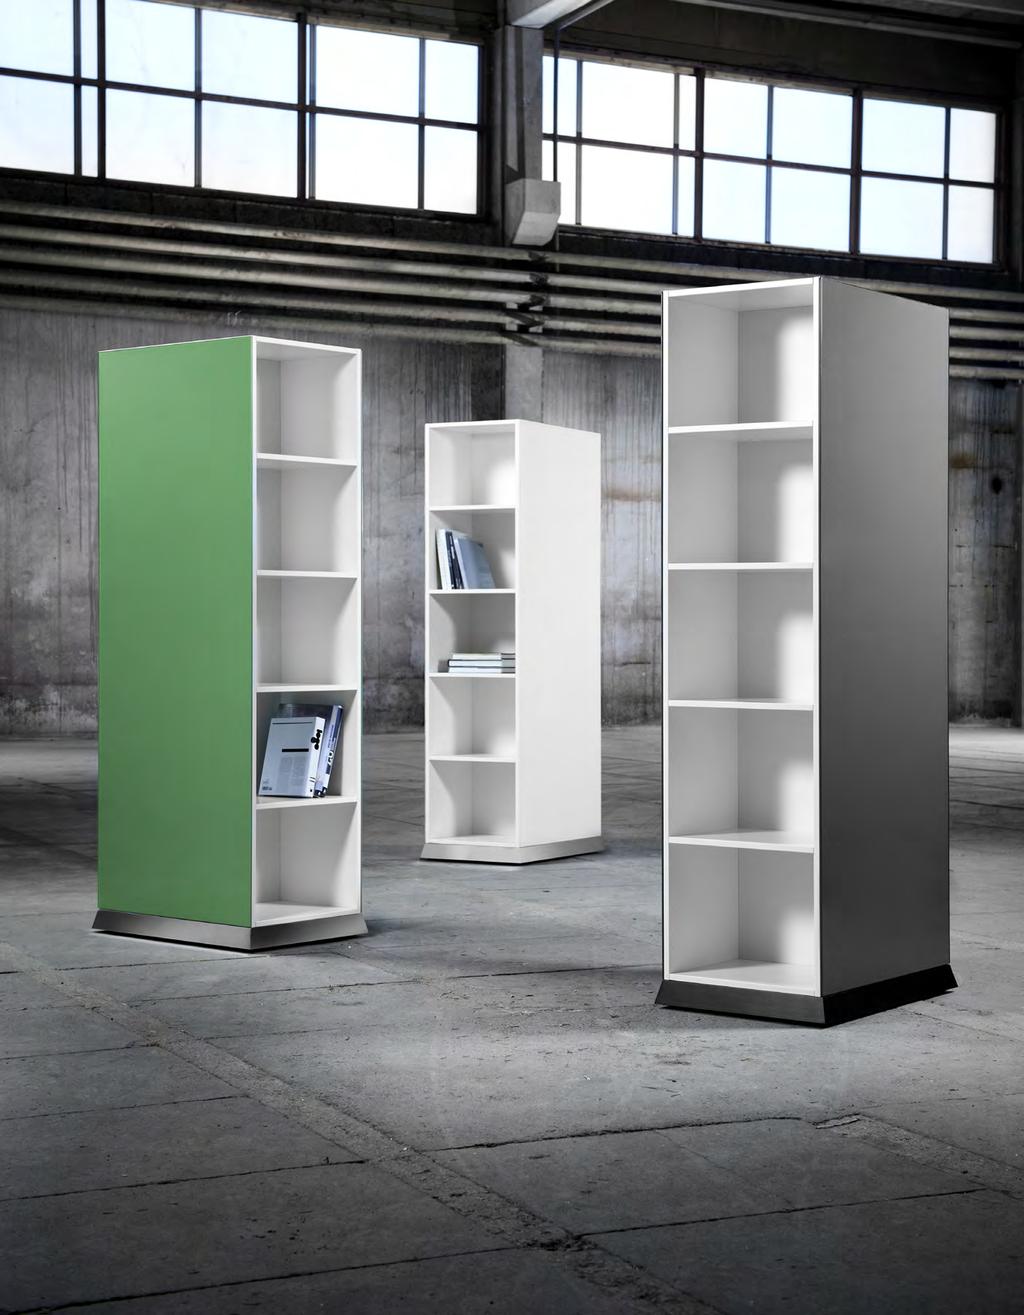 The M4 Cabinet is a mobile storage unit with shelves on both sides that can also